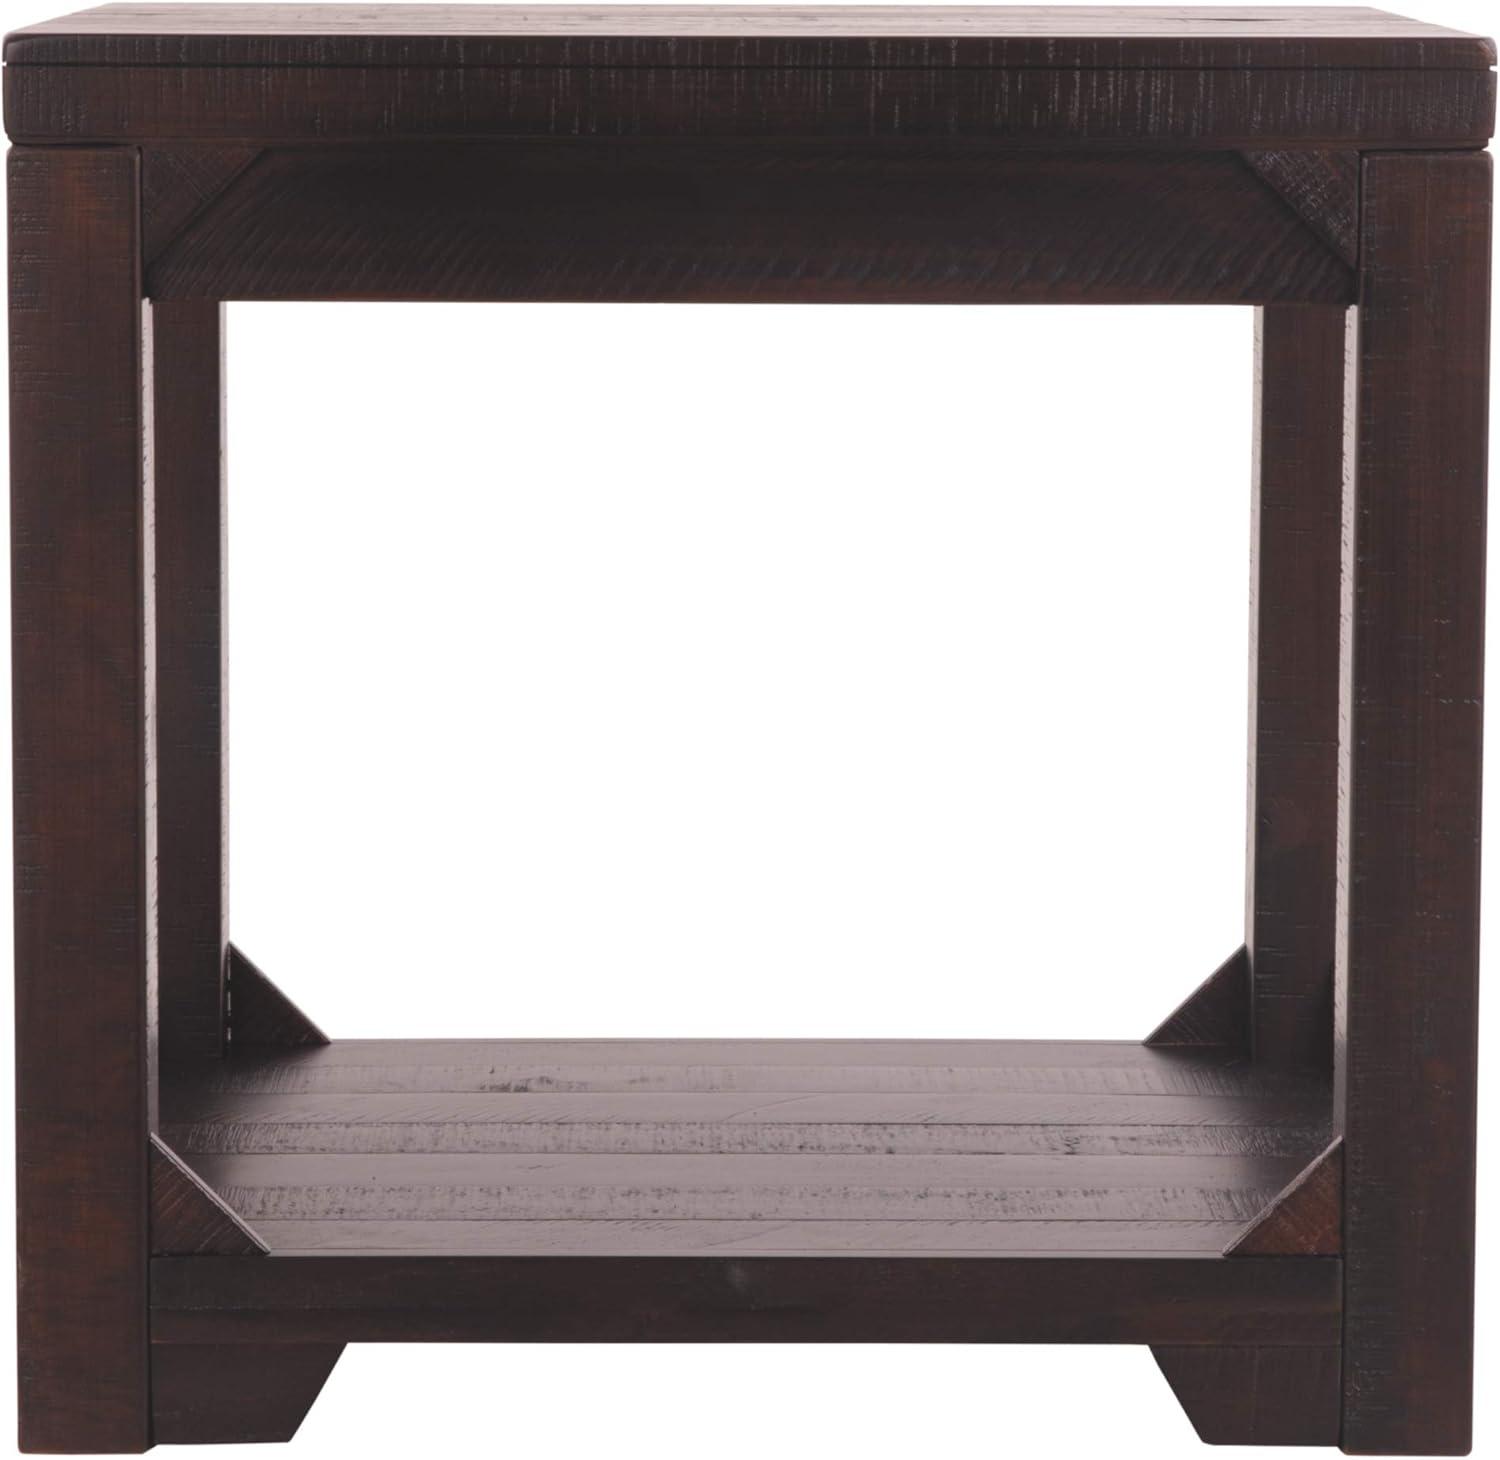 Rogness Rustic Rectangular End Table with Storage, Dark Brown